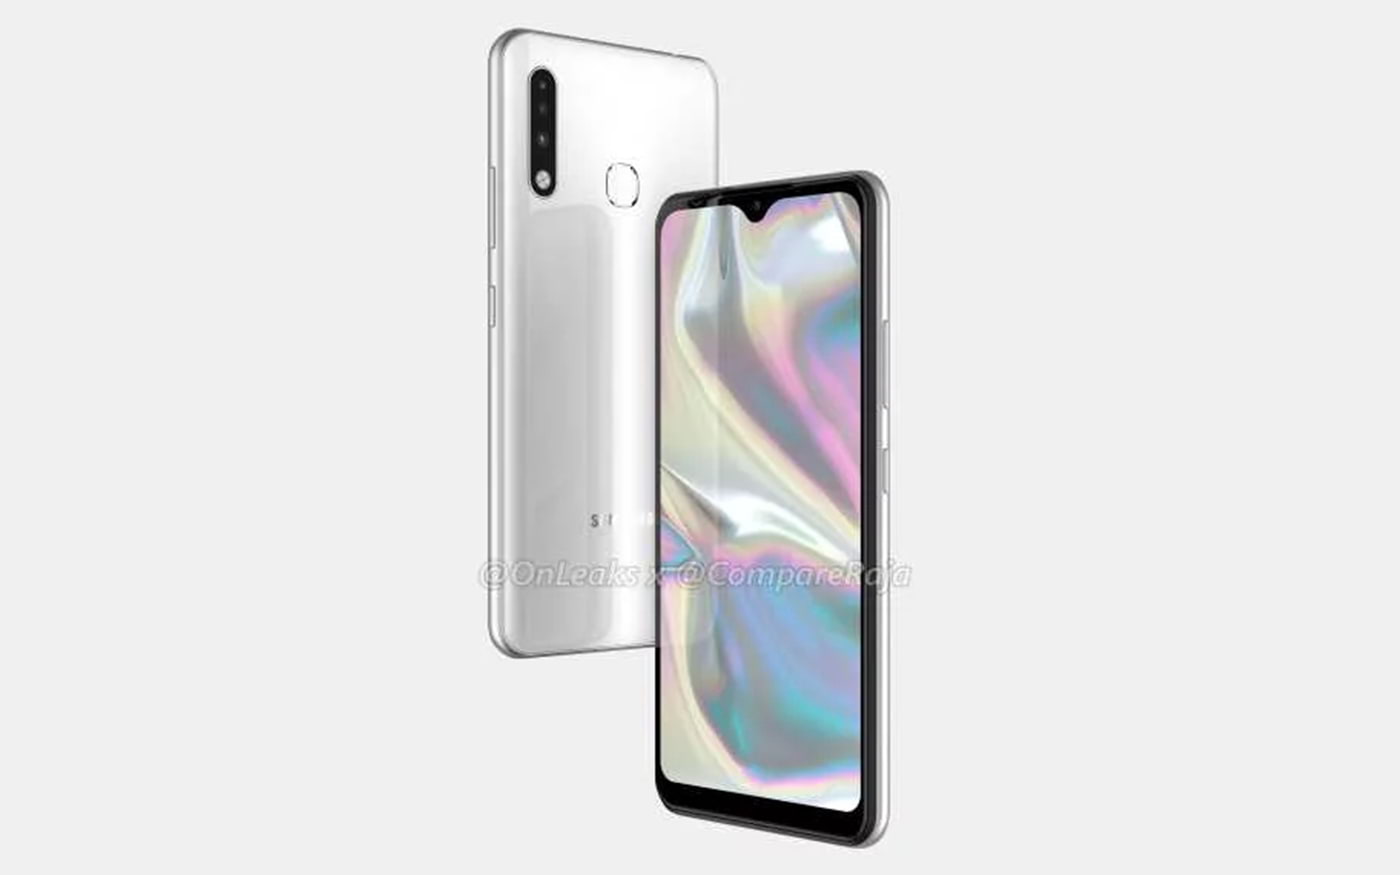 Renderings reveal design of Galaxy A70e